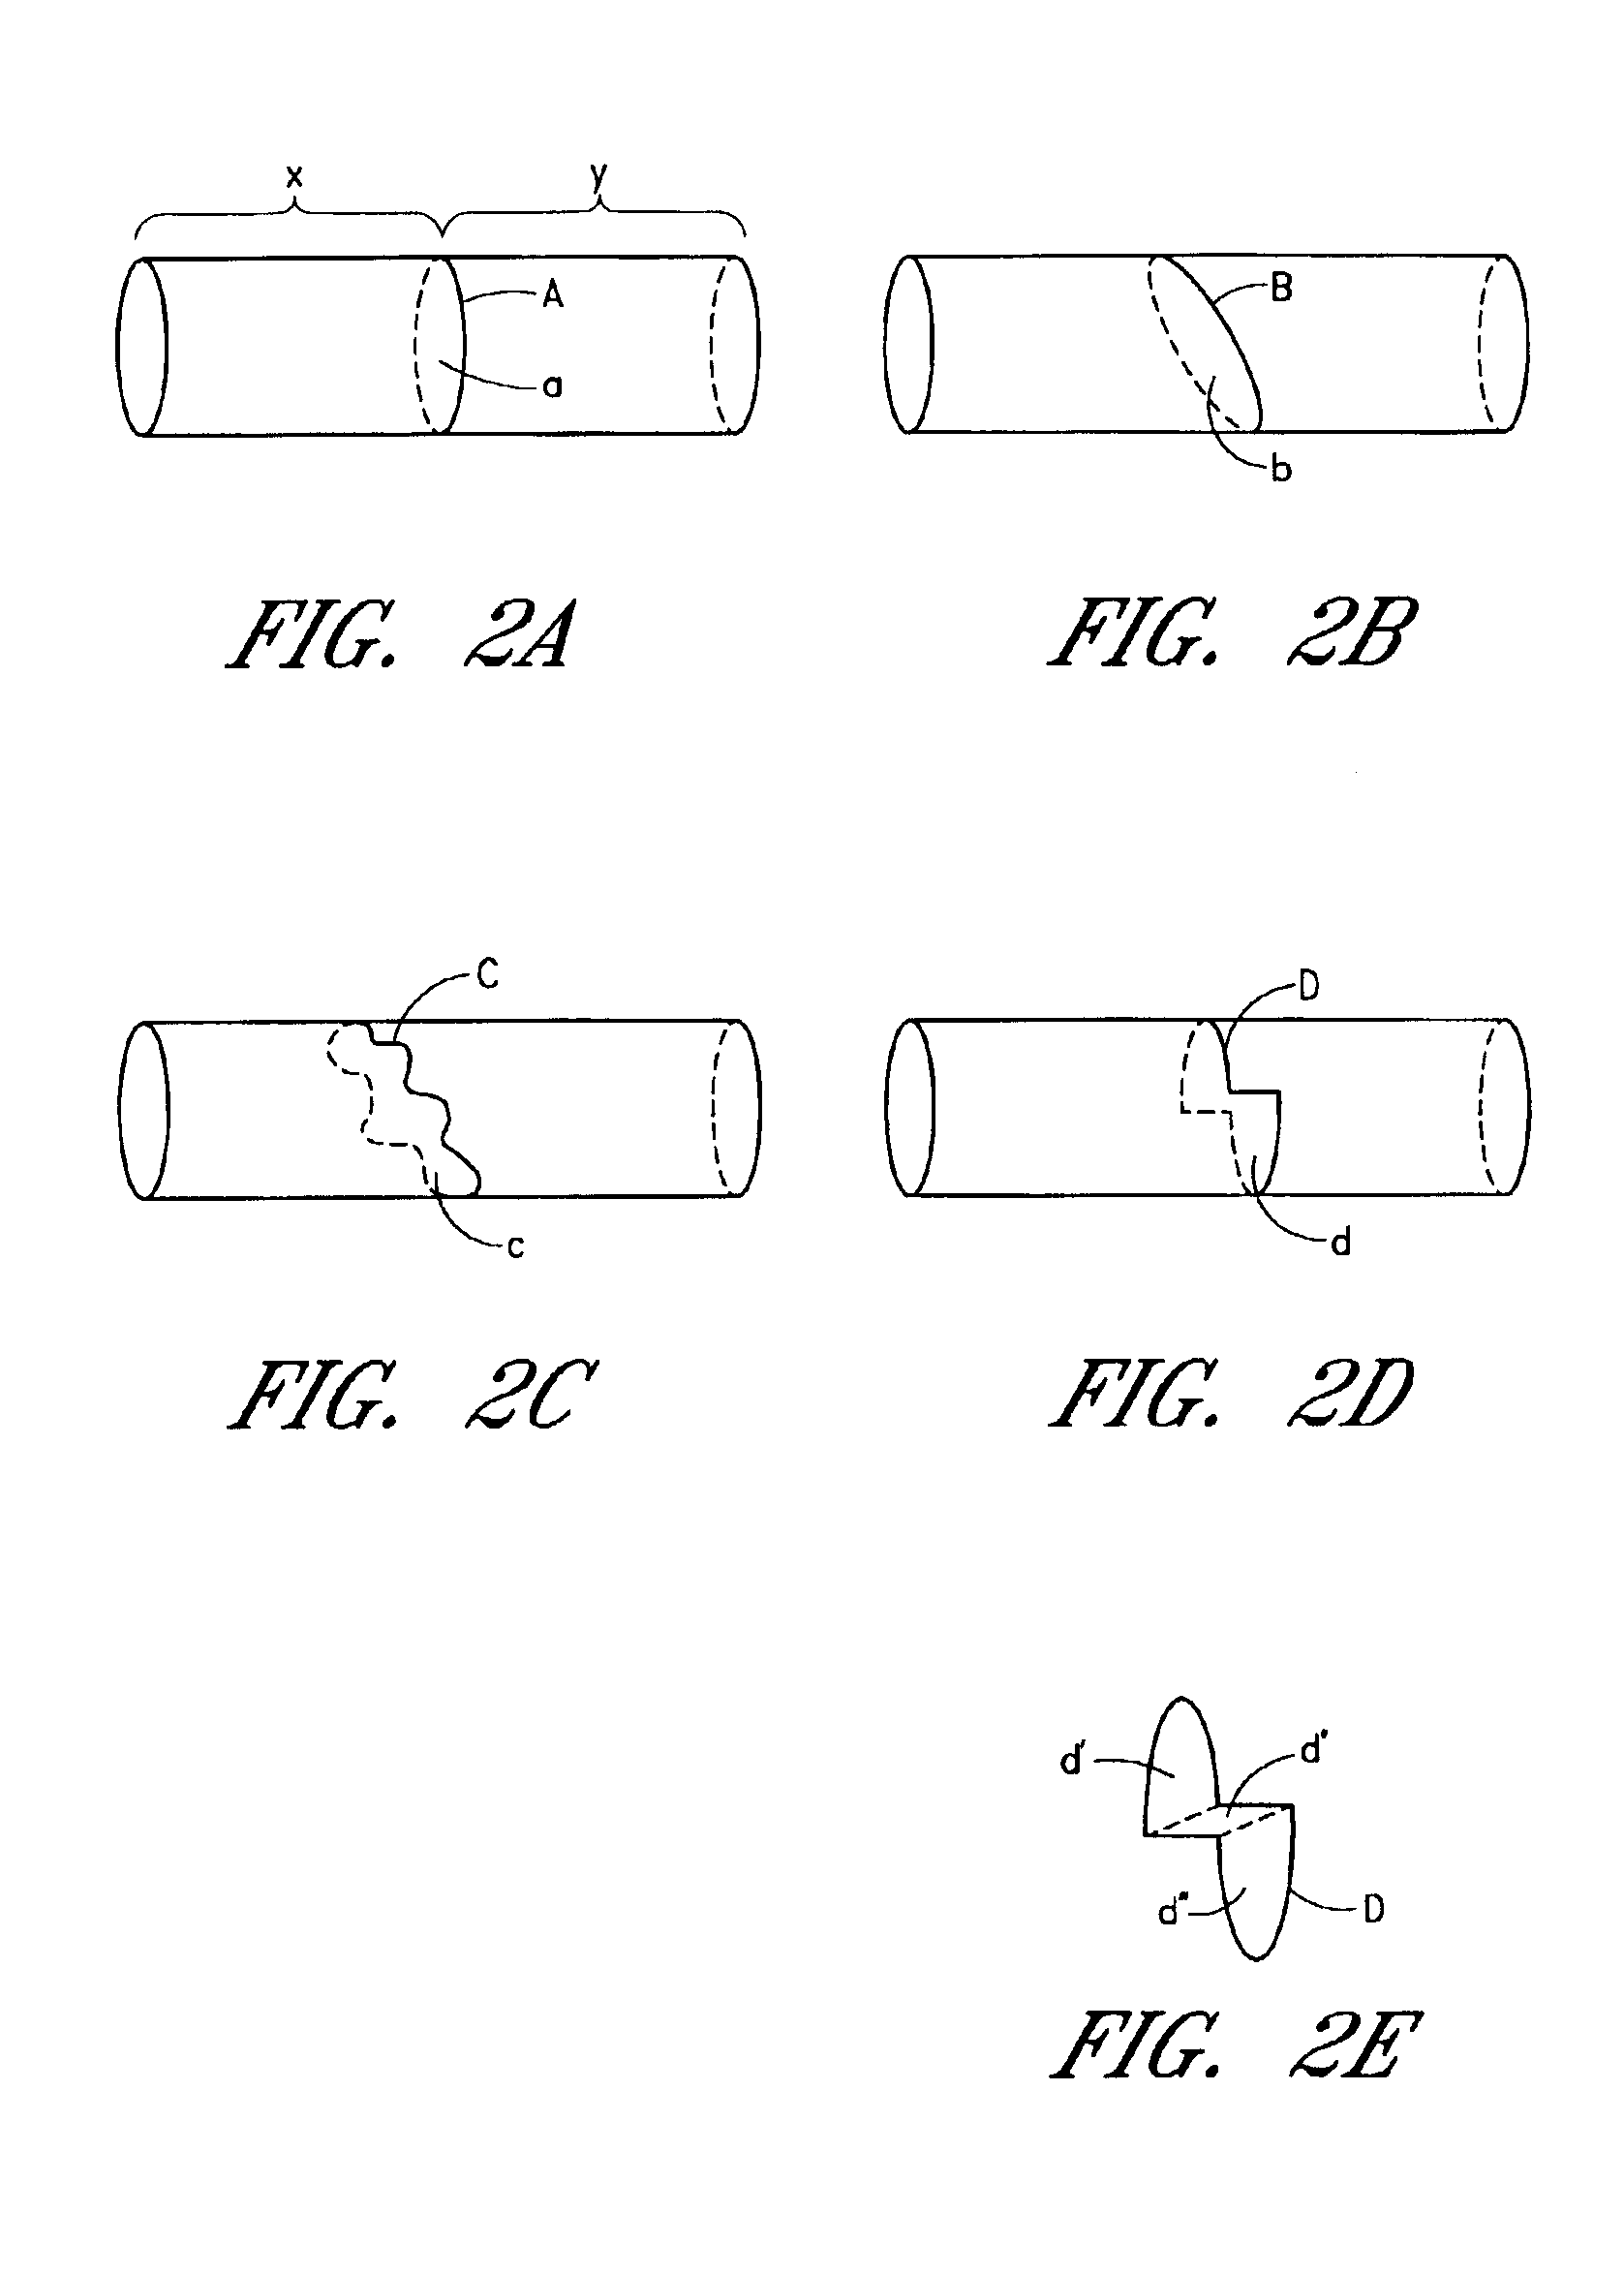 Tissue ablation device assembly and method of electrically isolating a pulmonary vein ostium from an atrial wall